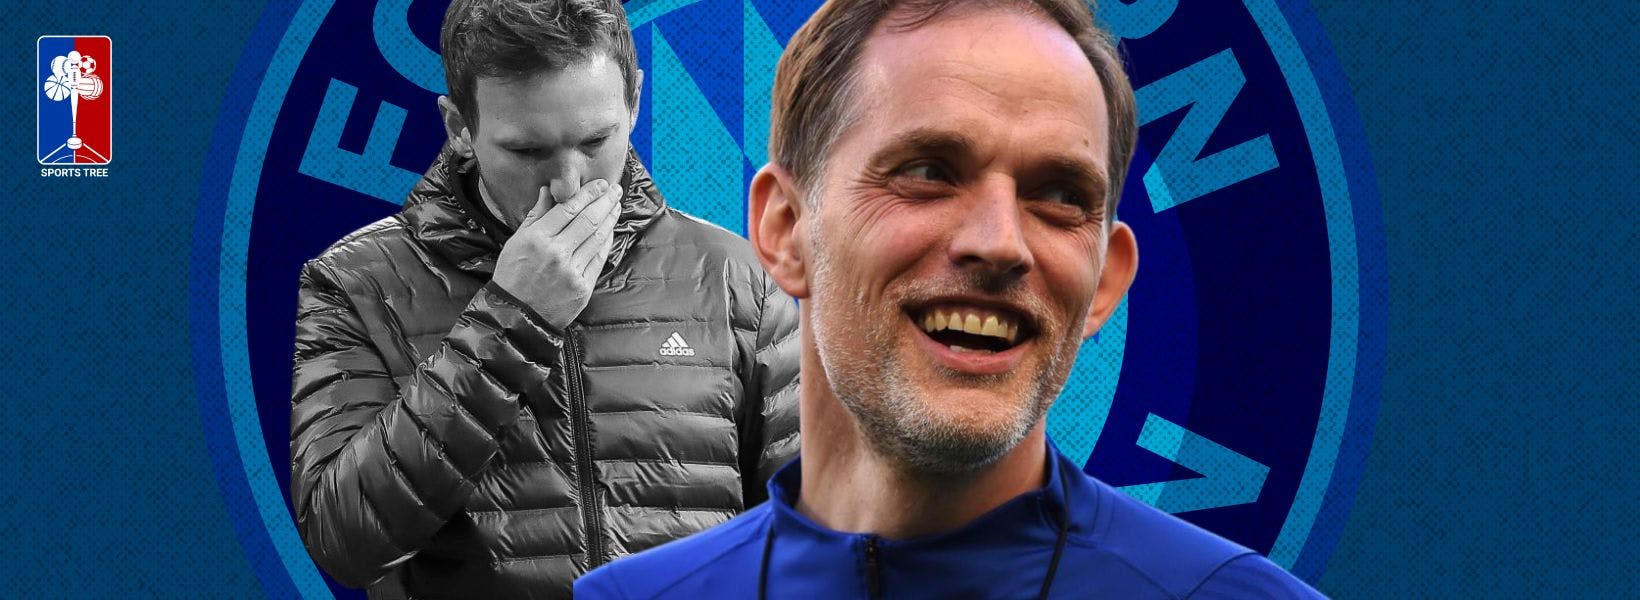 Bayern Munich fired Julian Nagelsmann and immediately hire Thomas Tuchel in a shocking series of events